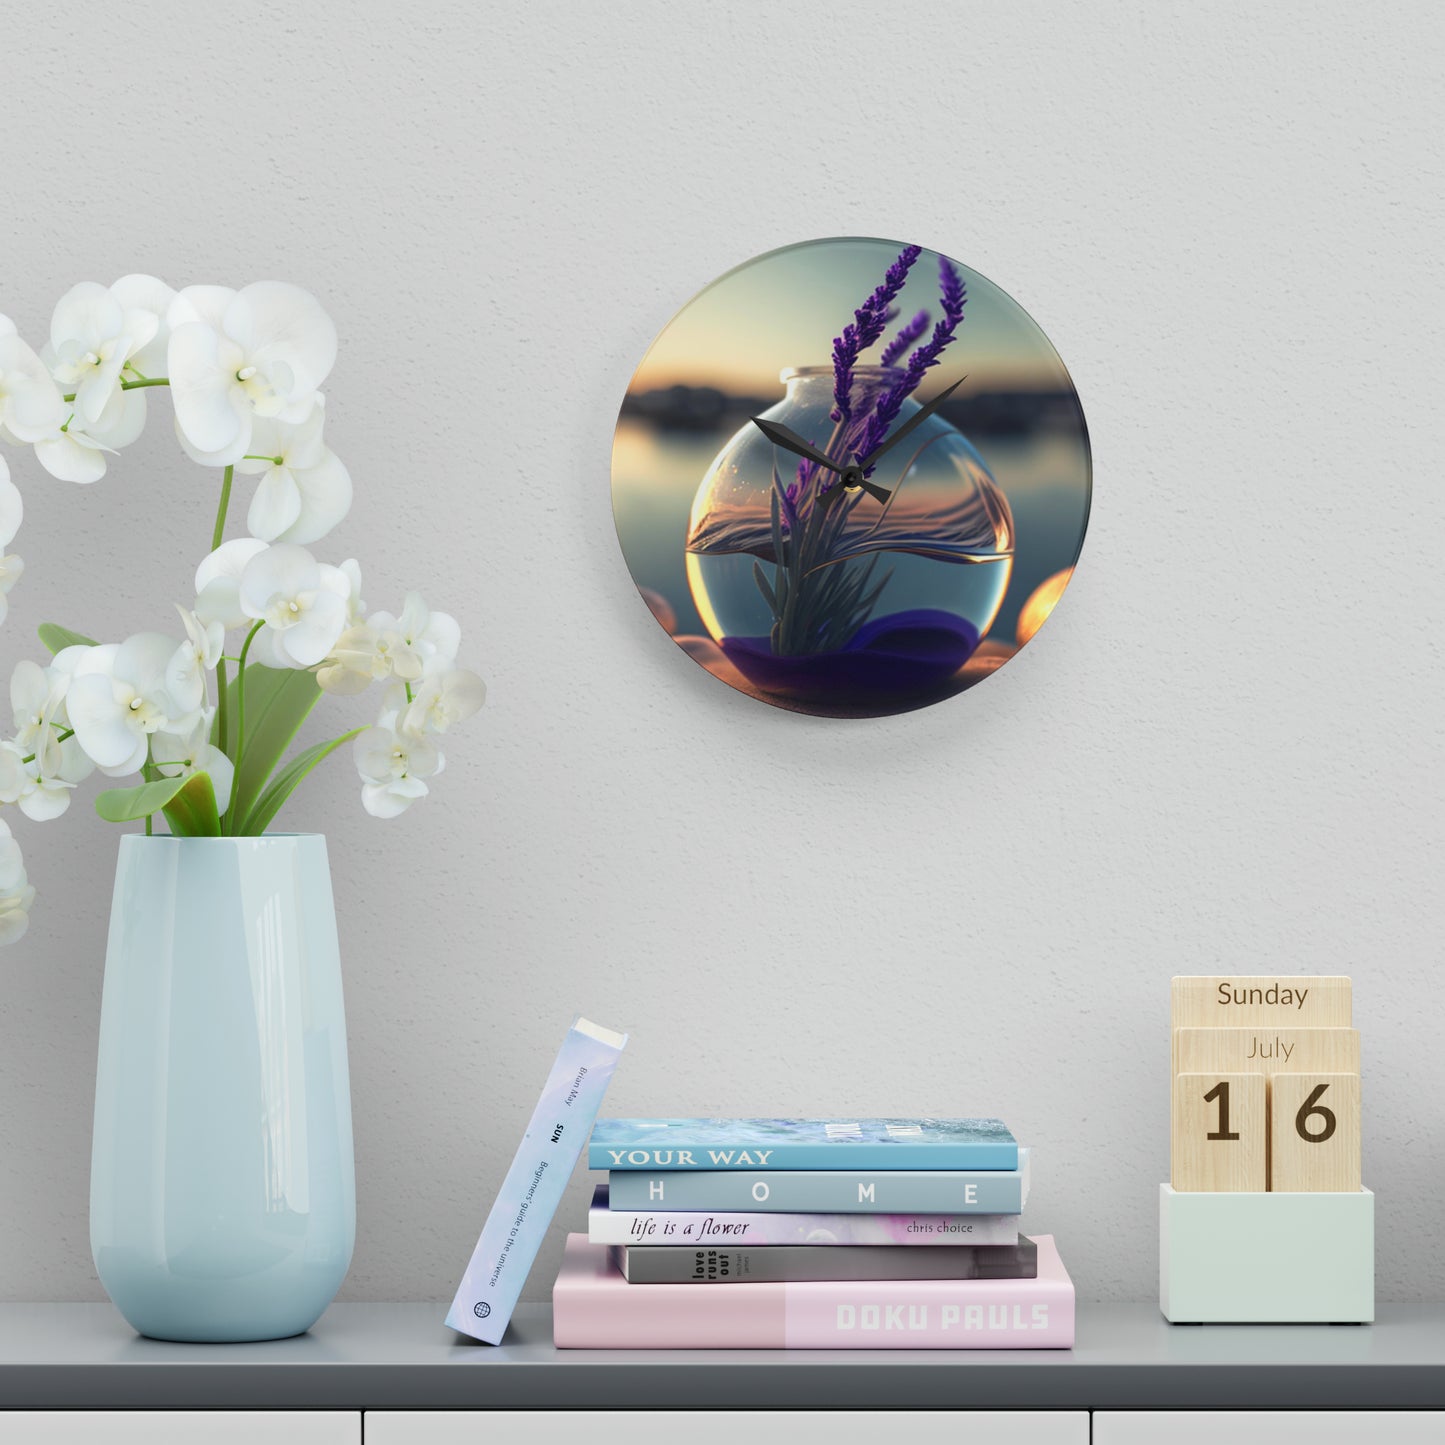 Acrylic Wall Clock Lavender in a vase 3